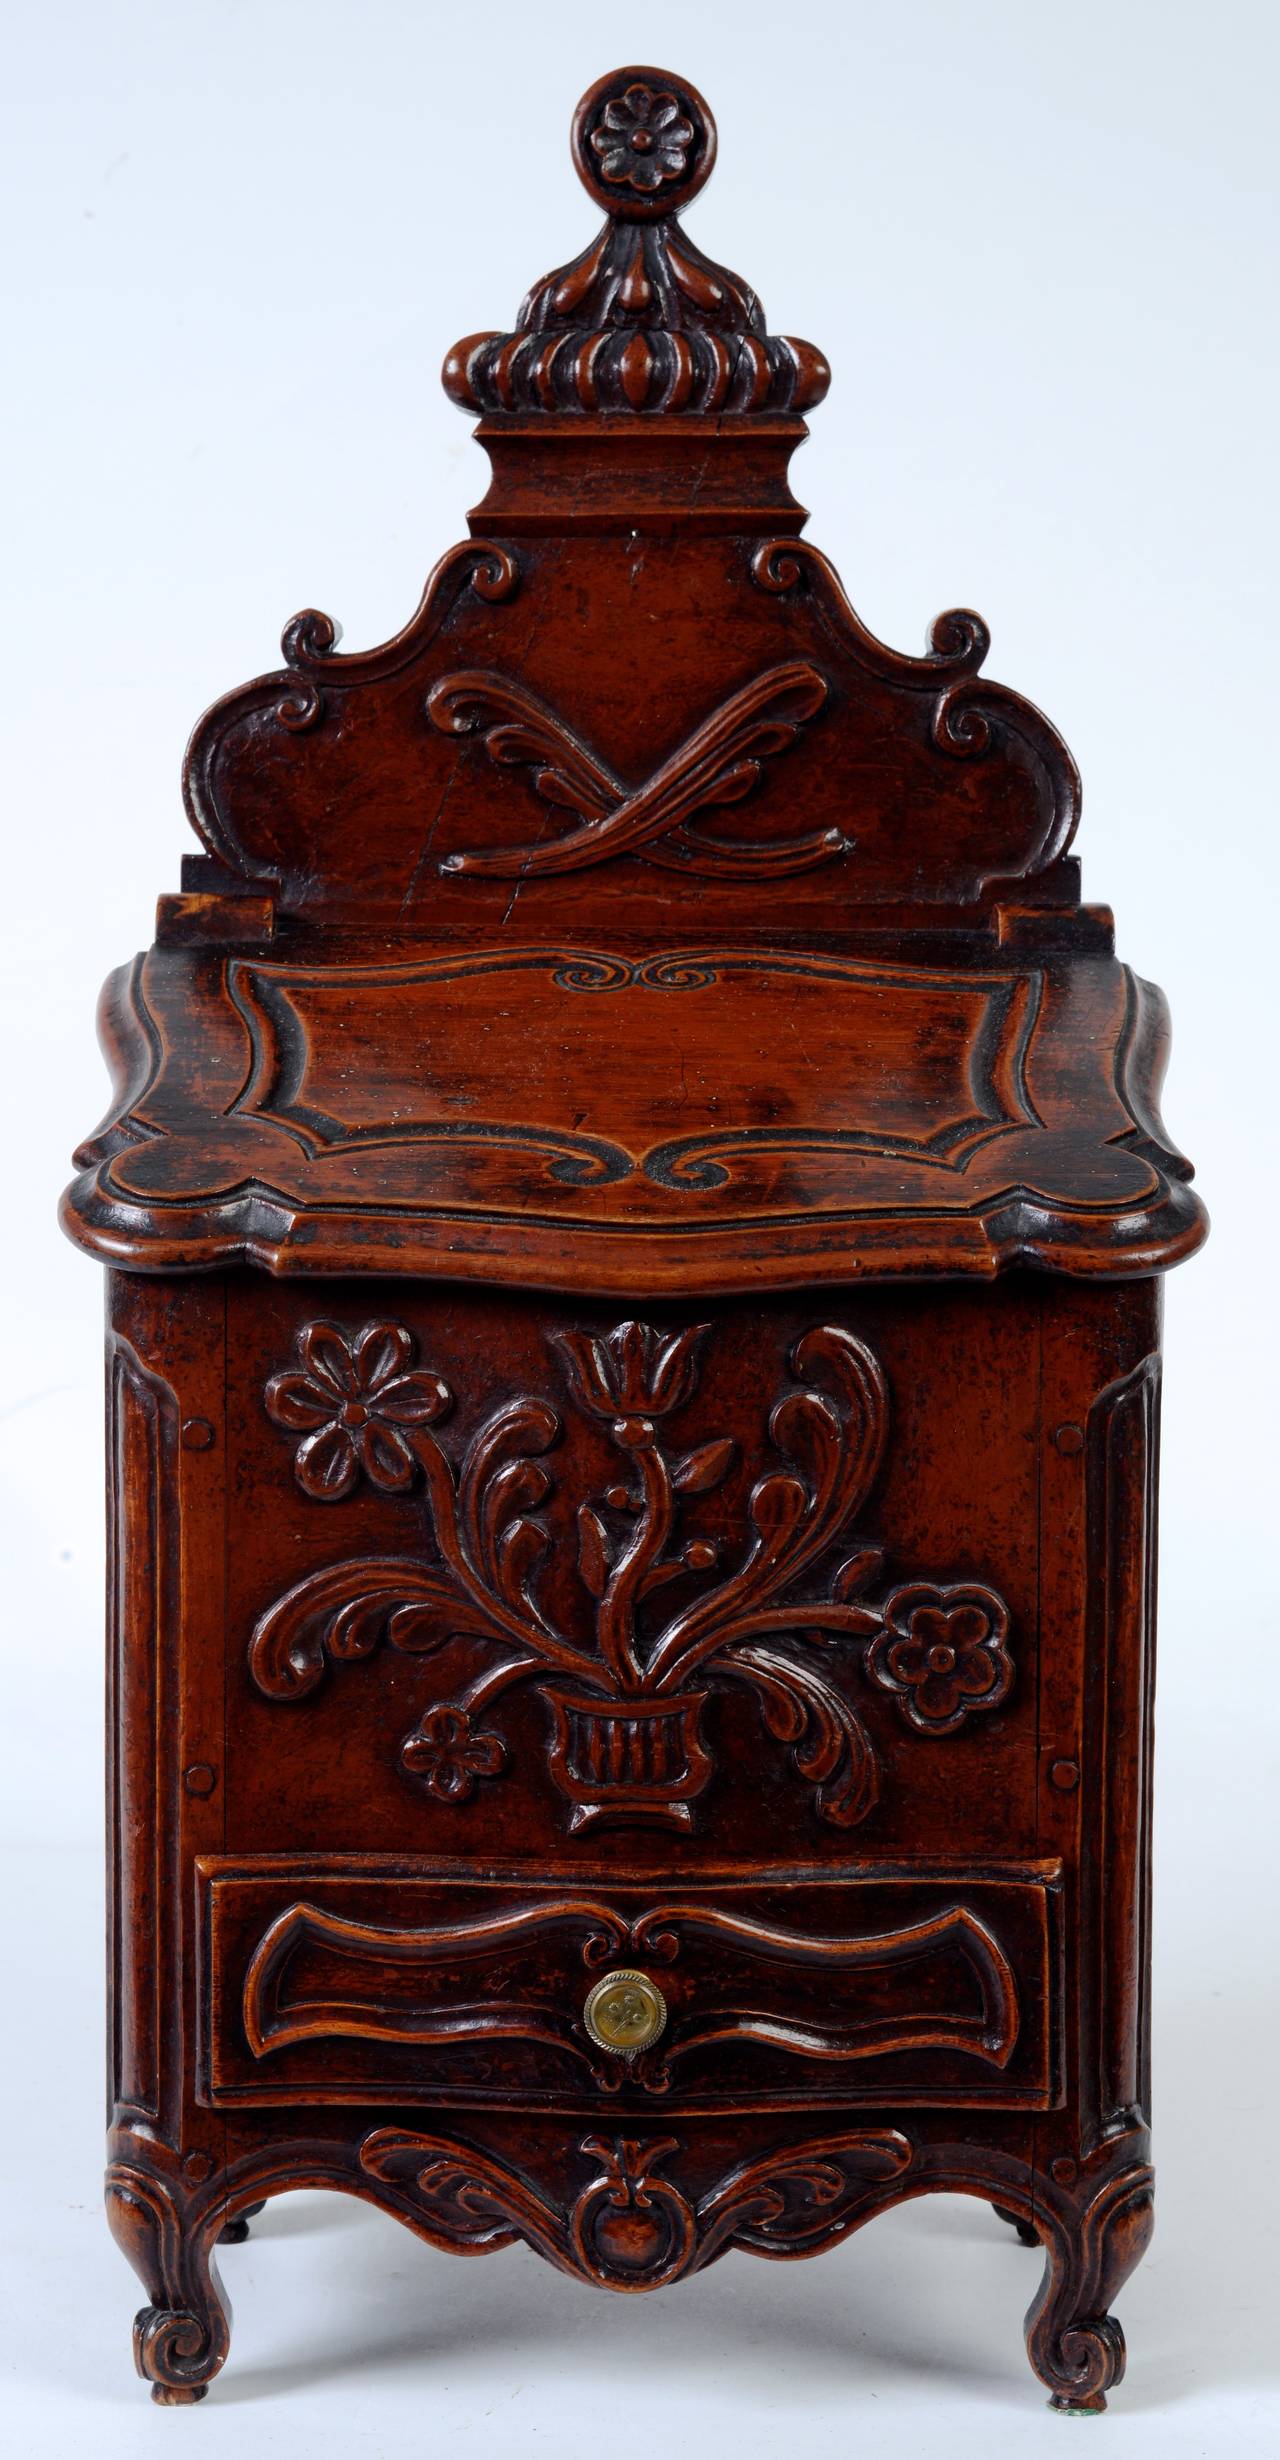 This exceptional French candlebox, c1800, has fine hand-carving and a beautiful patina. It has a candle compartment covered with a hinged slant shaped lid. Below the compartment is a single carved drawer with a brass knob. The body has a carved